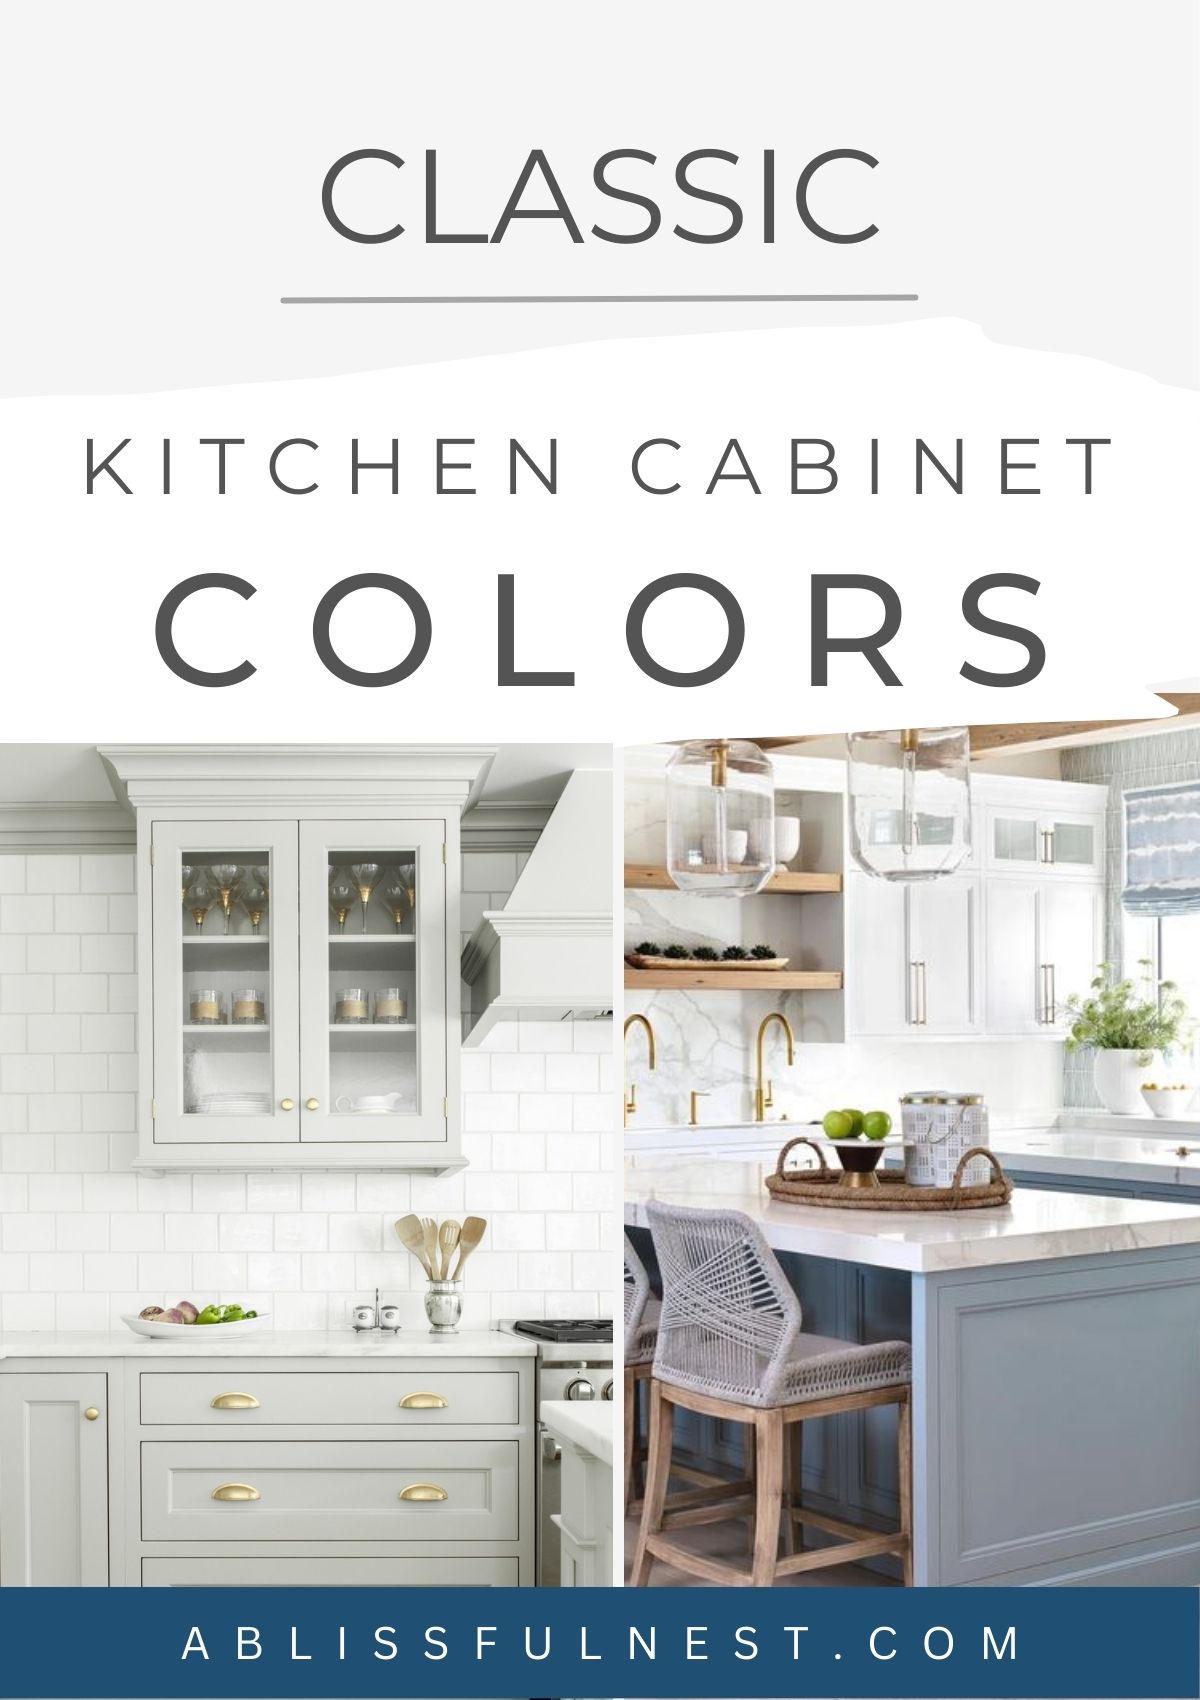 Classic Kitchen Cabinet Colors - A Blissful Nest